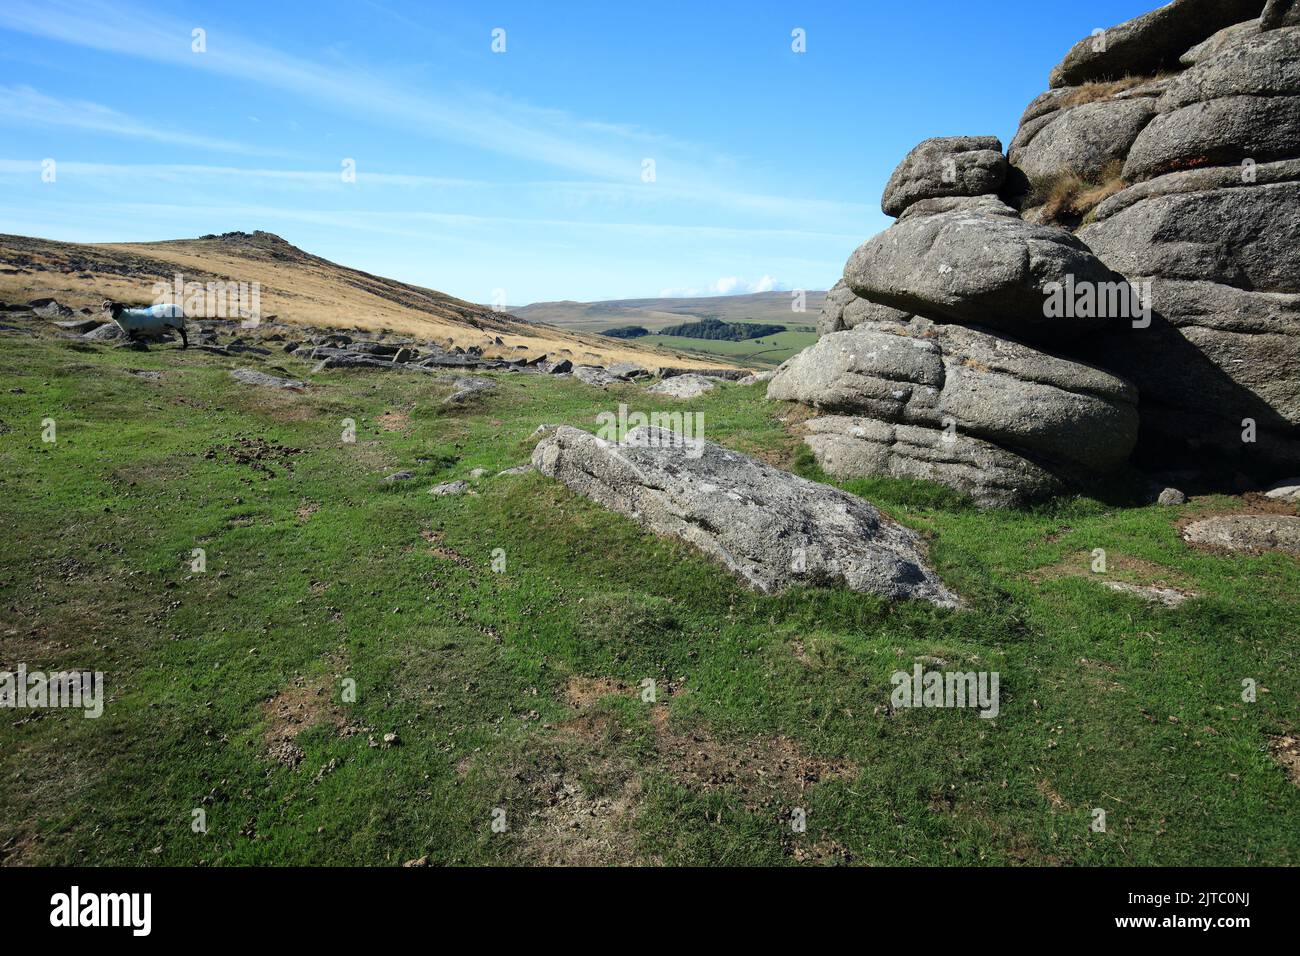 View from Belstone common, including Belstone tor, Yes tor and West Mill tor in the distance, Dartmoor, Devon, England, UK Stock Photo